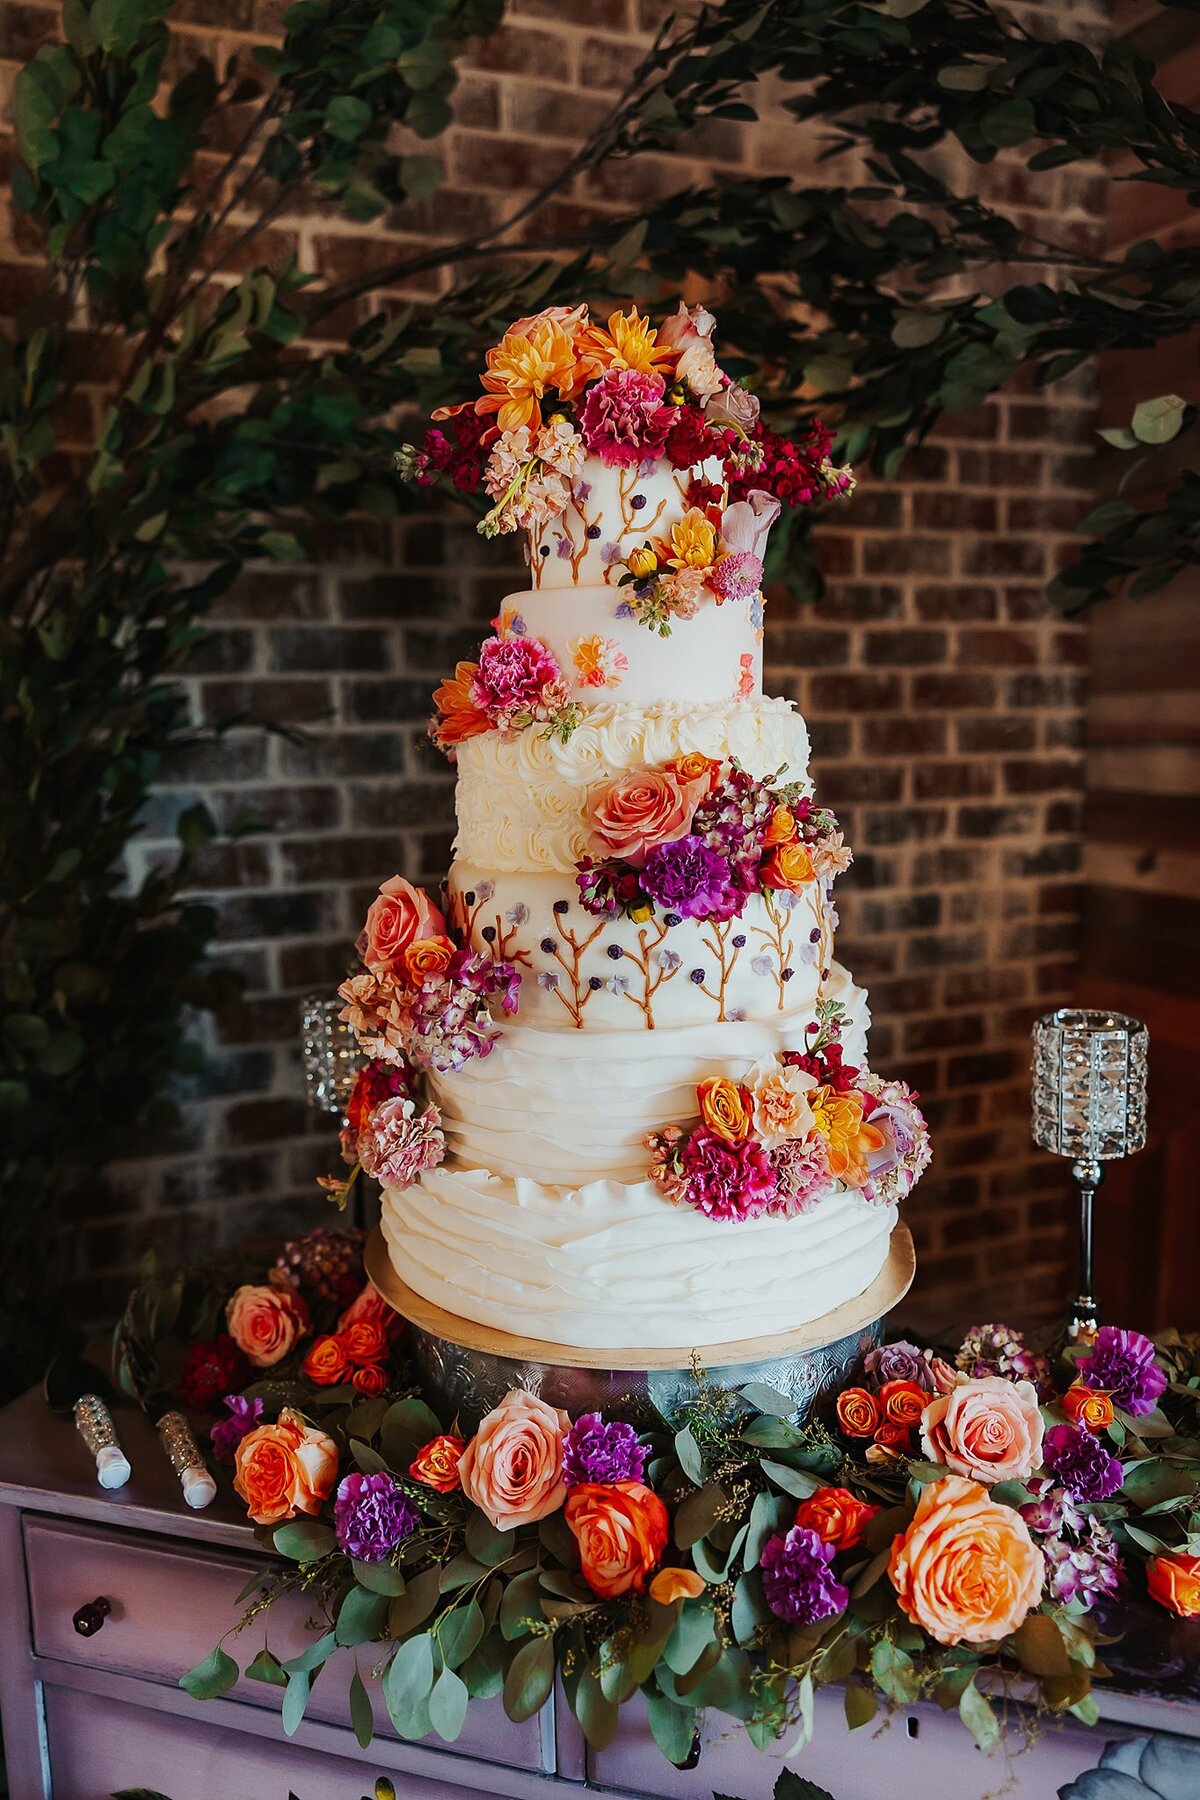 Very tall seven tier wedding cake with clusters of peach roses, pink roses, purple roses and orange roses sitting on a purple dresser with a large assortment of roses and a crystal candle holder around the base. There is a brick wall and arching ficus tree behind the cake at Steel Magnolia Barn at a Nashville Wedding.